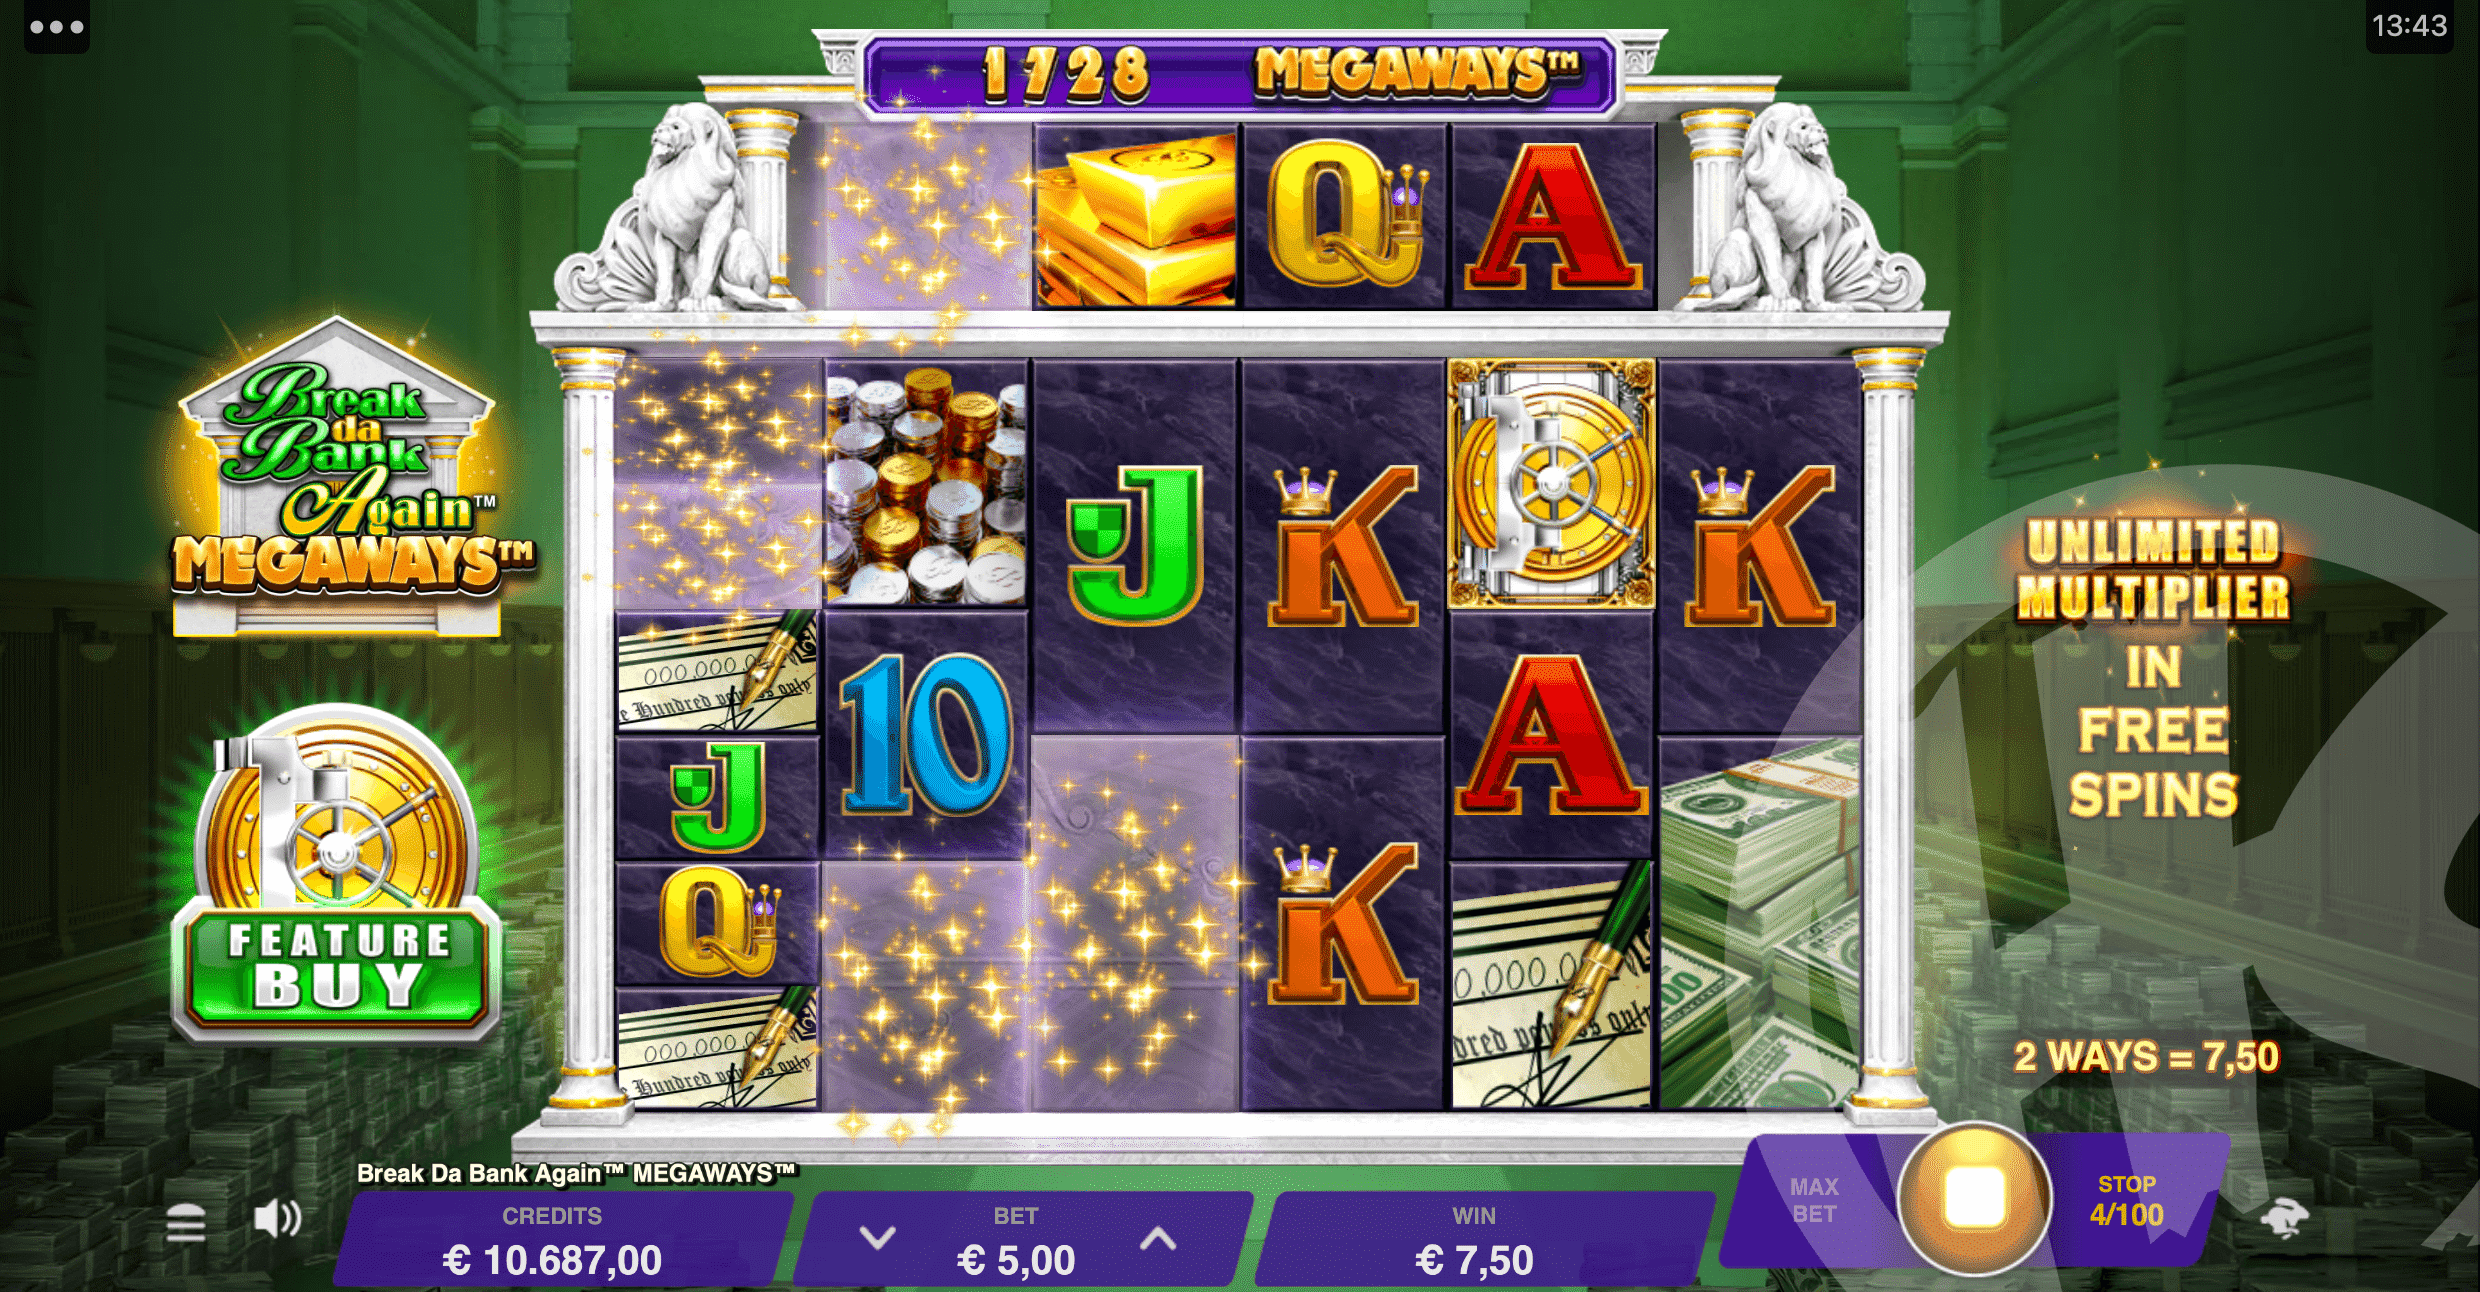 Rolling Reels are Active in The Base Game and Free Spins